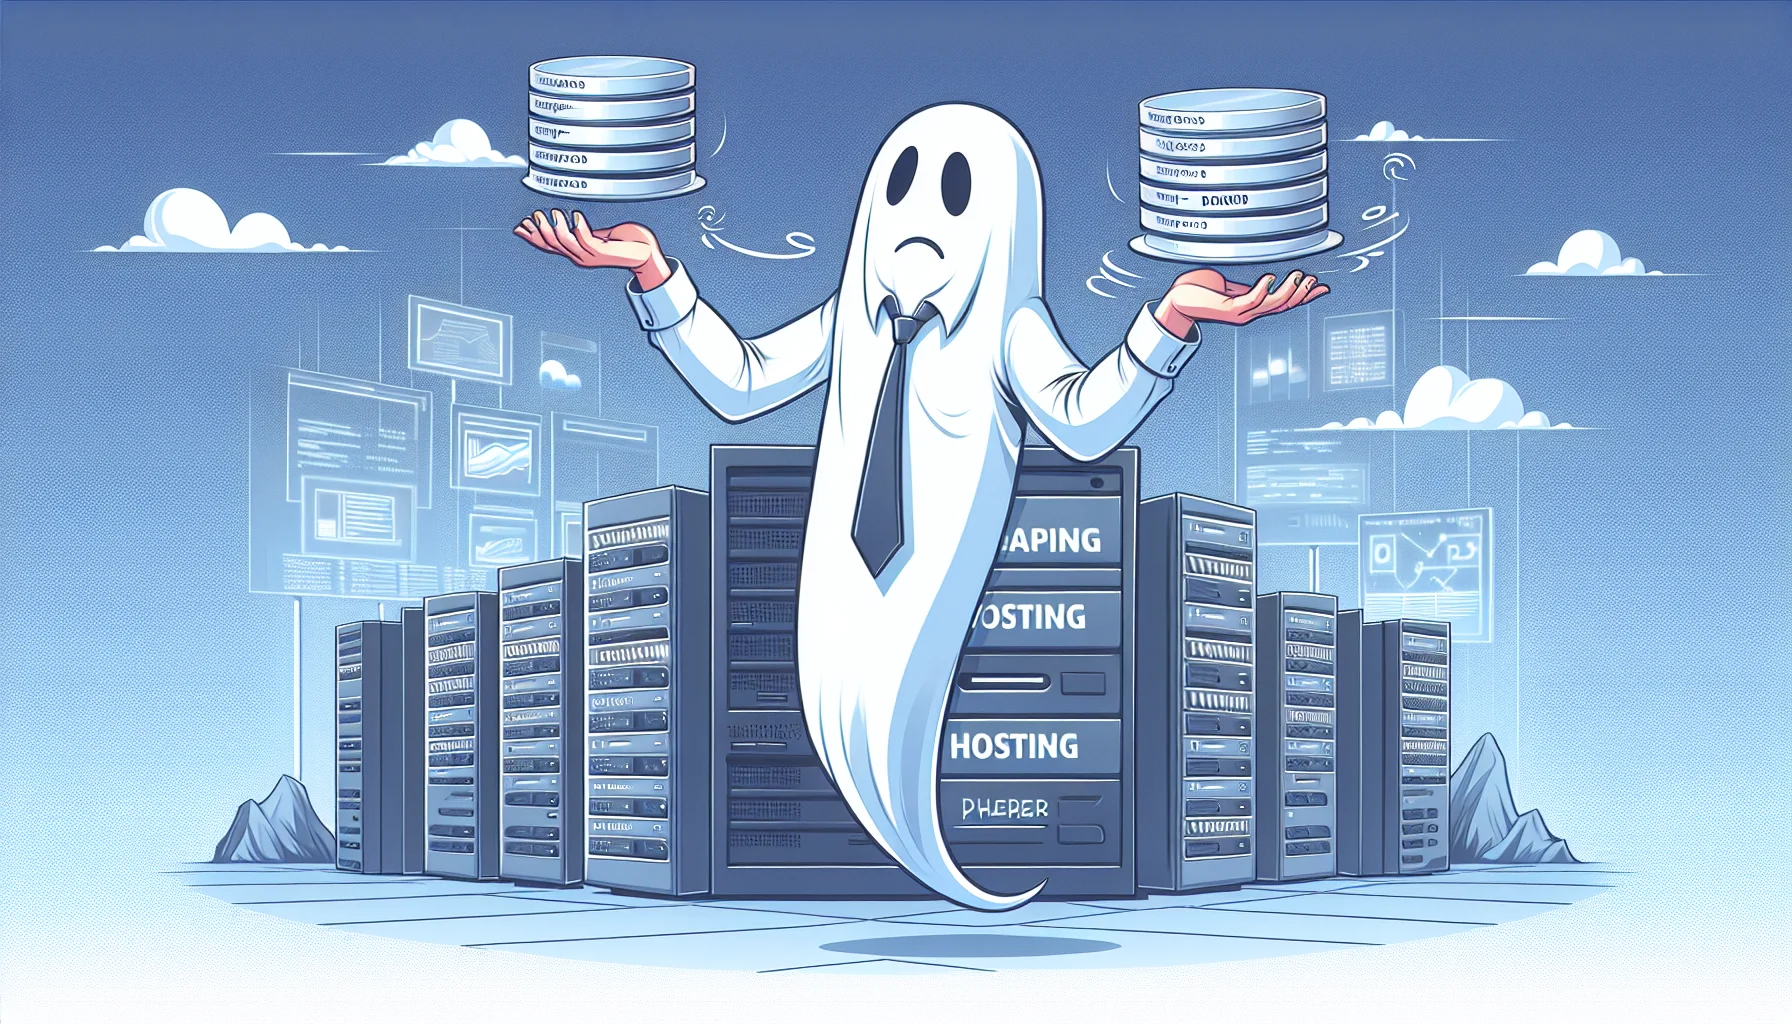 Create an image featuring a humorous portrayal of a phantom entity symbolizing an affordable web hosting service. The entity could have a comic spin, such as trying to juggle multiple web pages, servers, and databases, indicating the hosting capabilities. The background should hint towards a digital landscape, with representation of clouds and server racks subtly included. This lighthearted scene is meant to evoke the sense of reliable, yet enjoyable web hosting services. The specter should emanate an inviting aura to denote the enticing aspect of the hosting service.